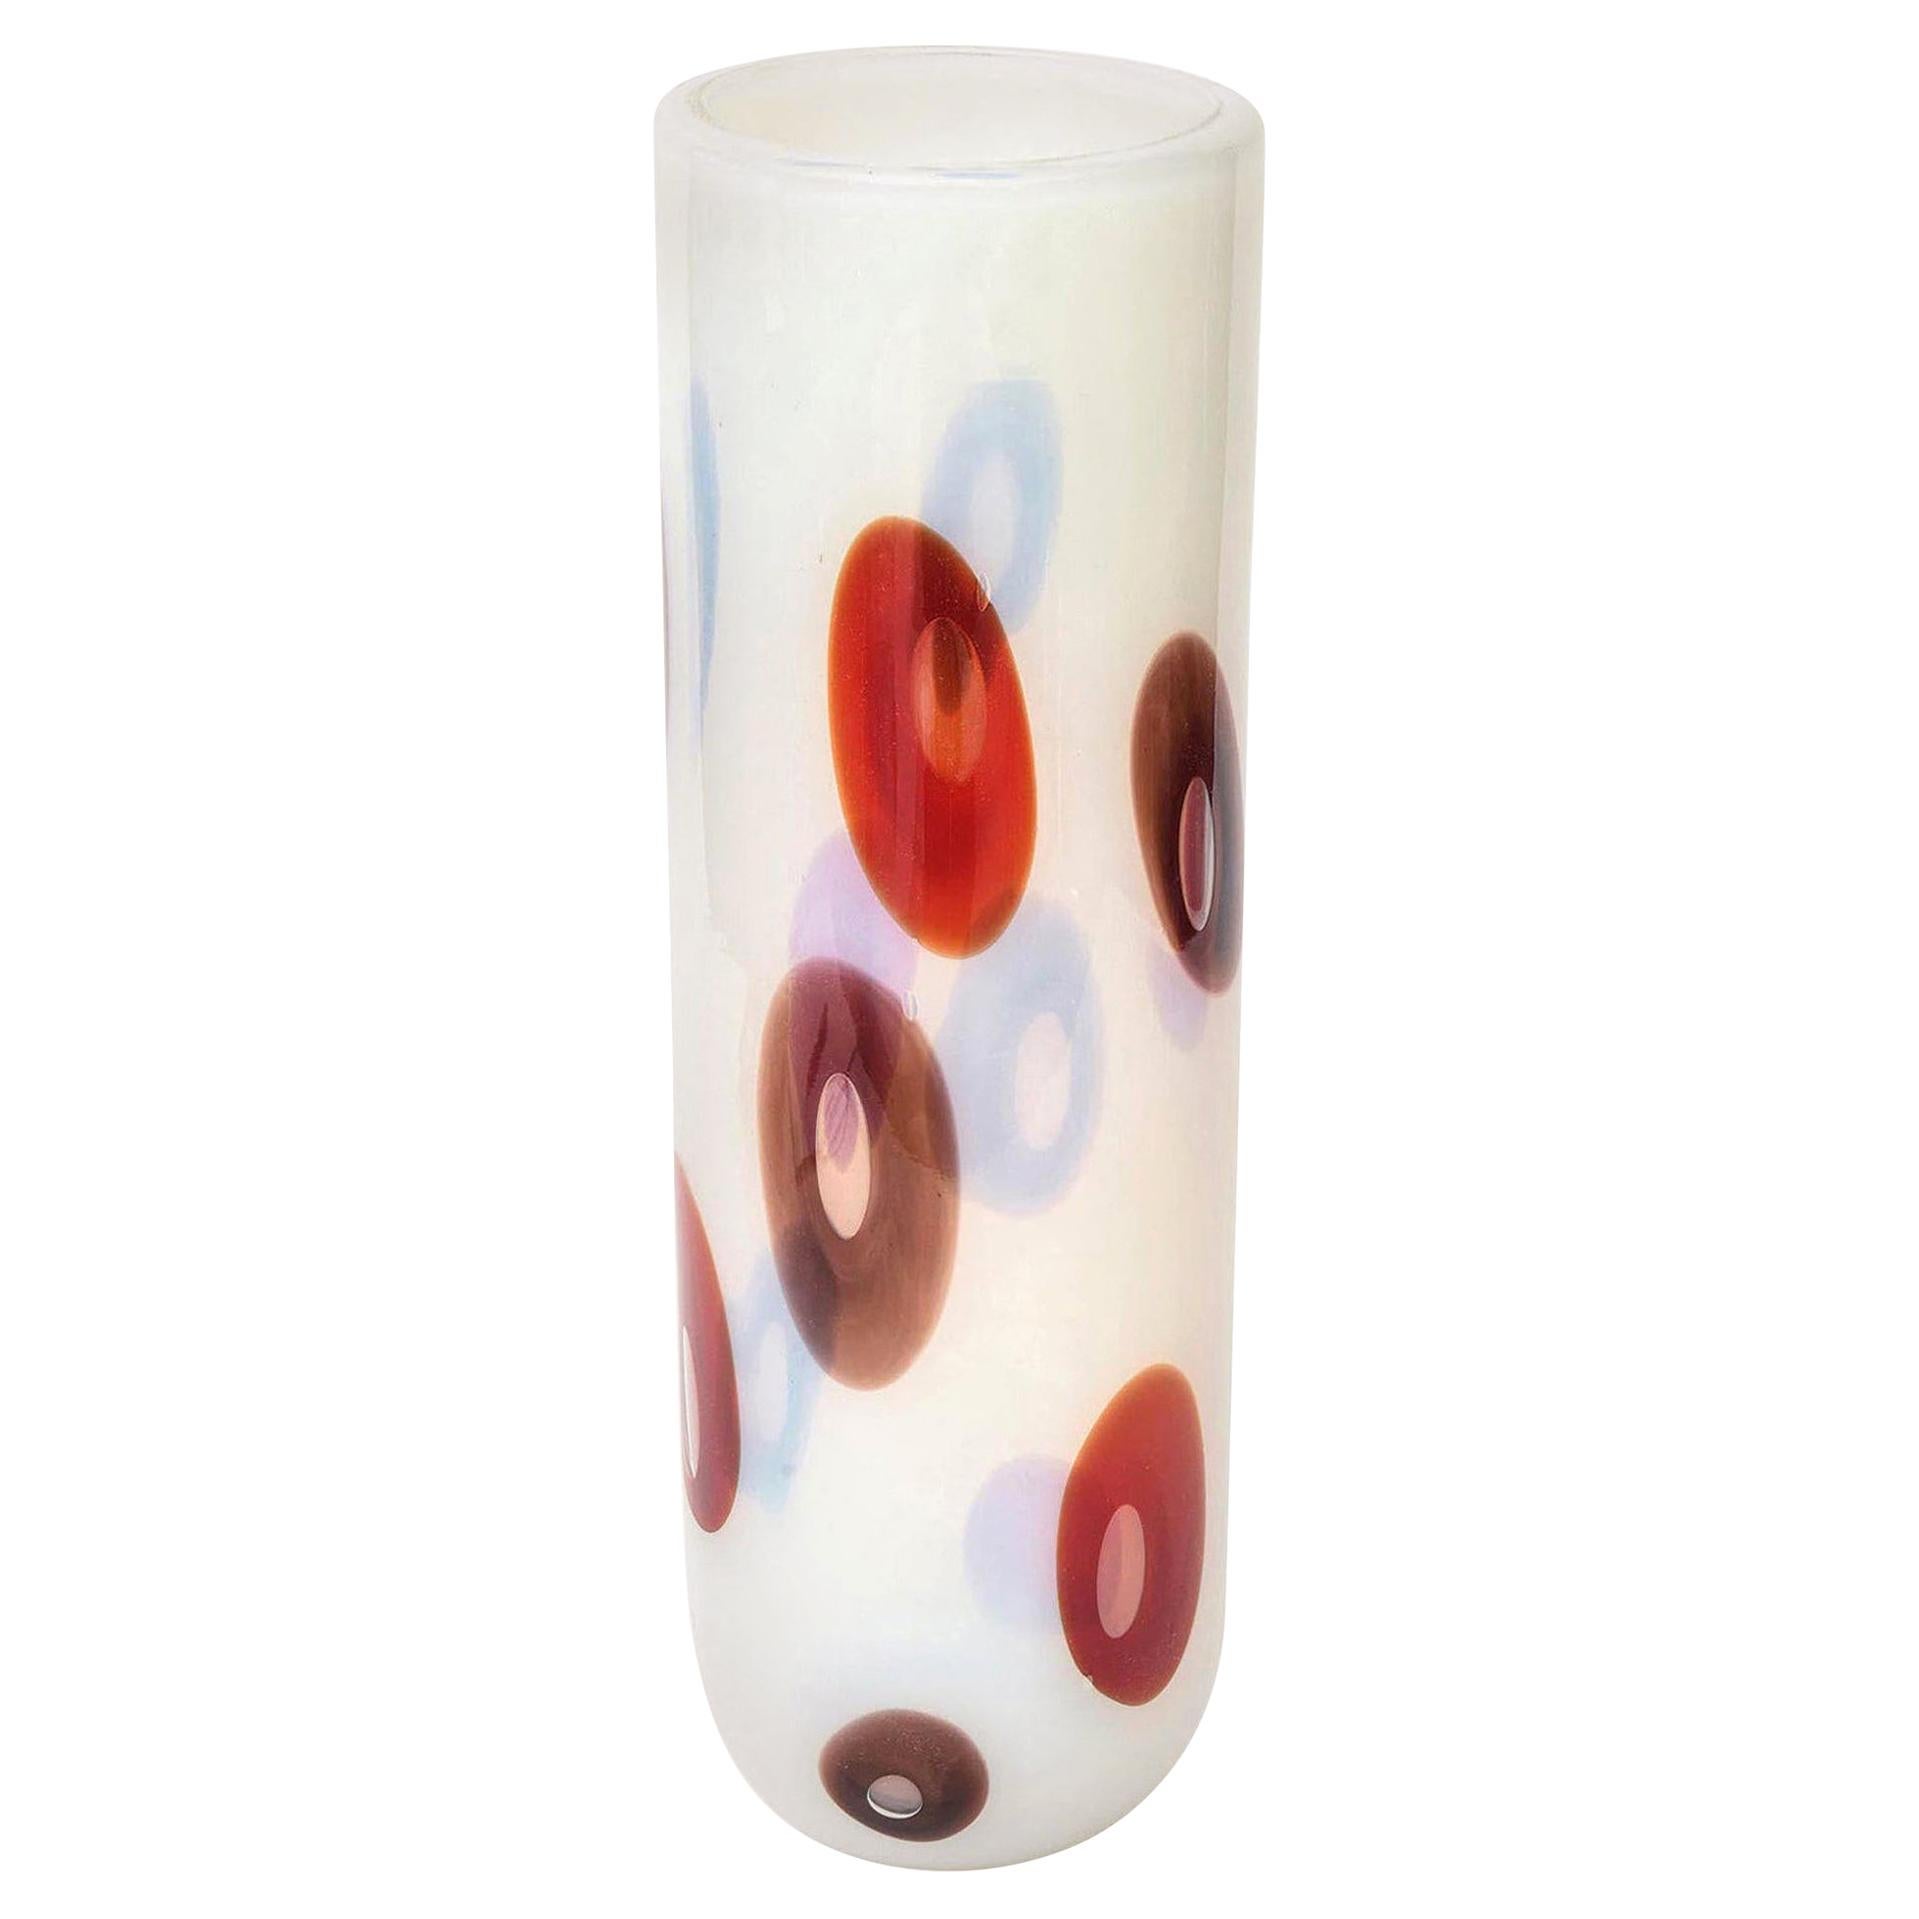 This absolutely stunning and rare Italian Murano opalescent glass vase by Anzolo Fuga for Avem has glorious applied murrines of colors of reds, browns with a purple hint. The original paper sticker is still intact as exemplified in the photos. The